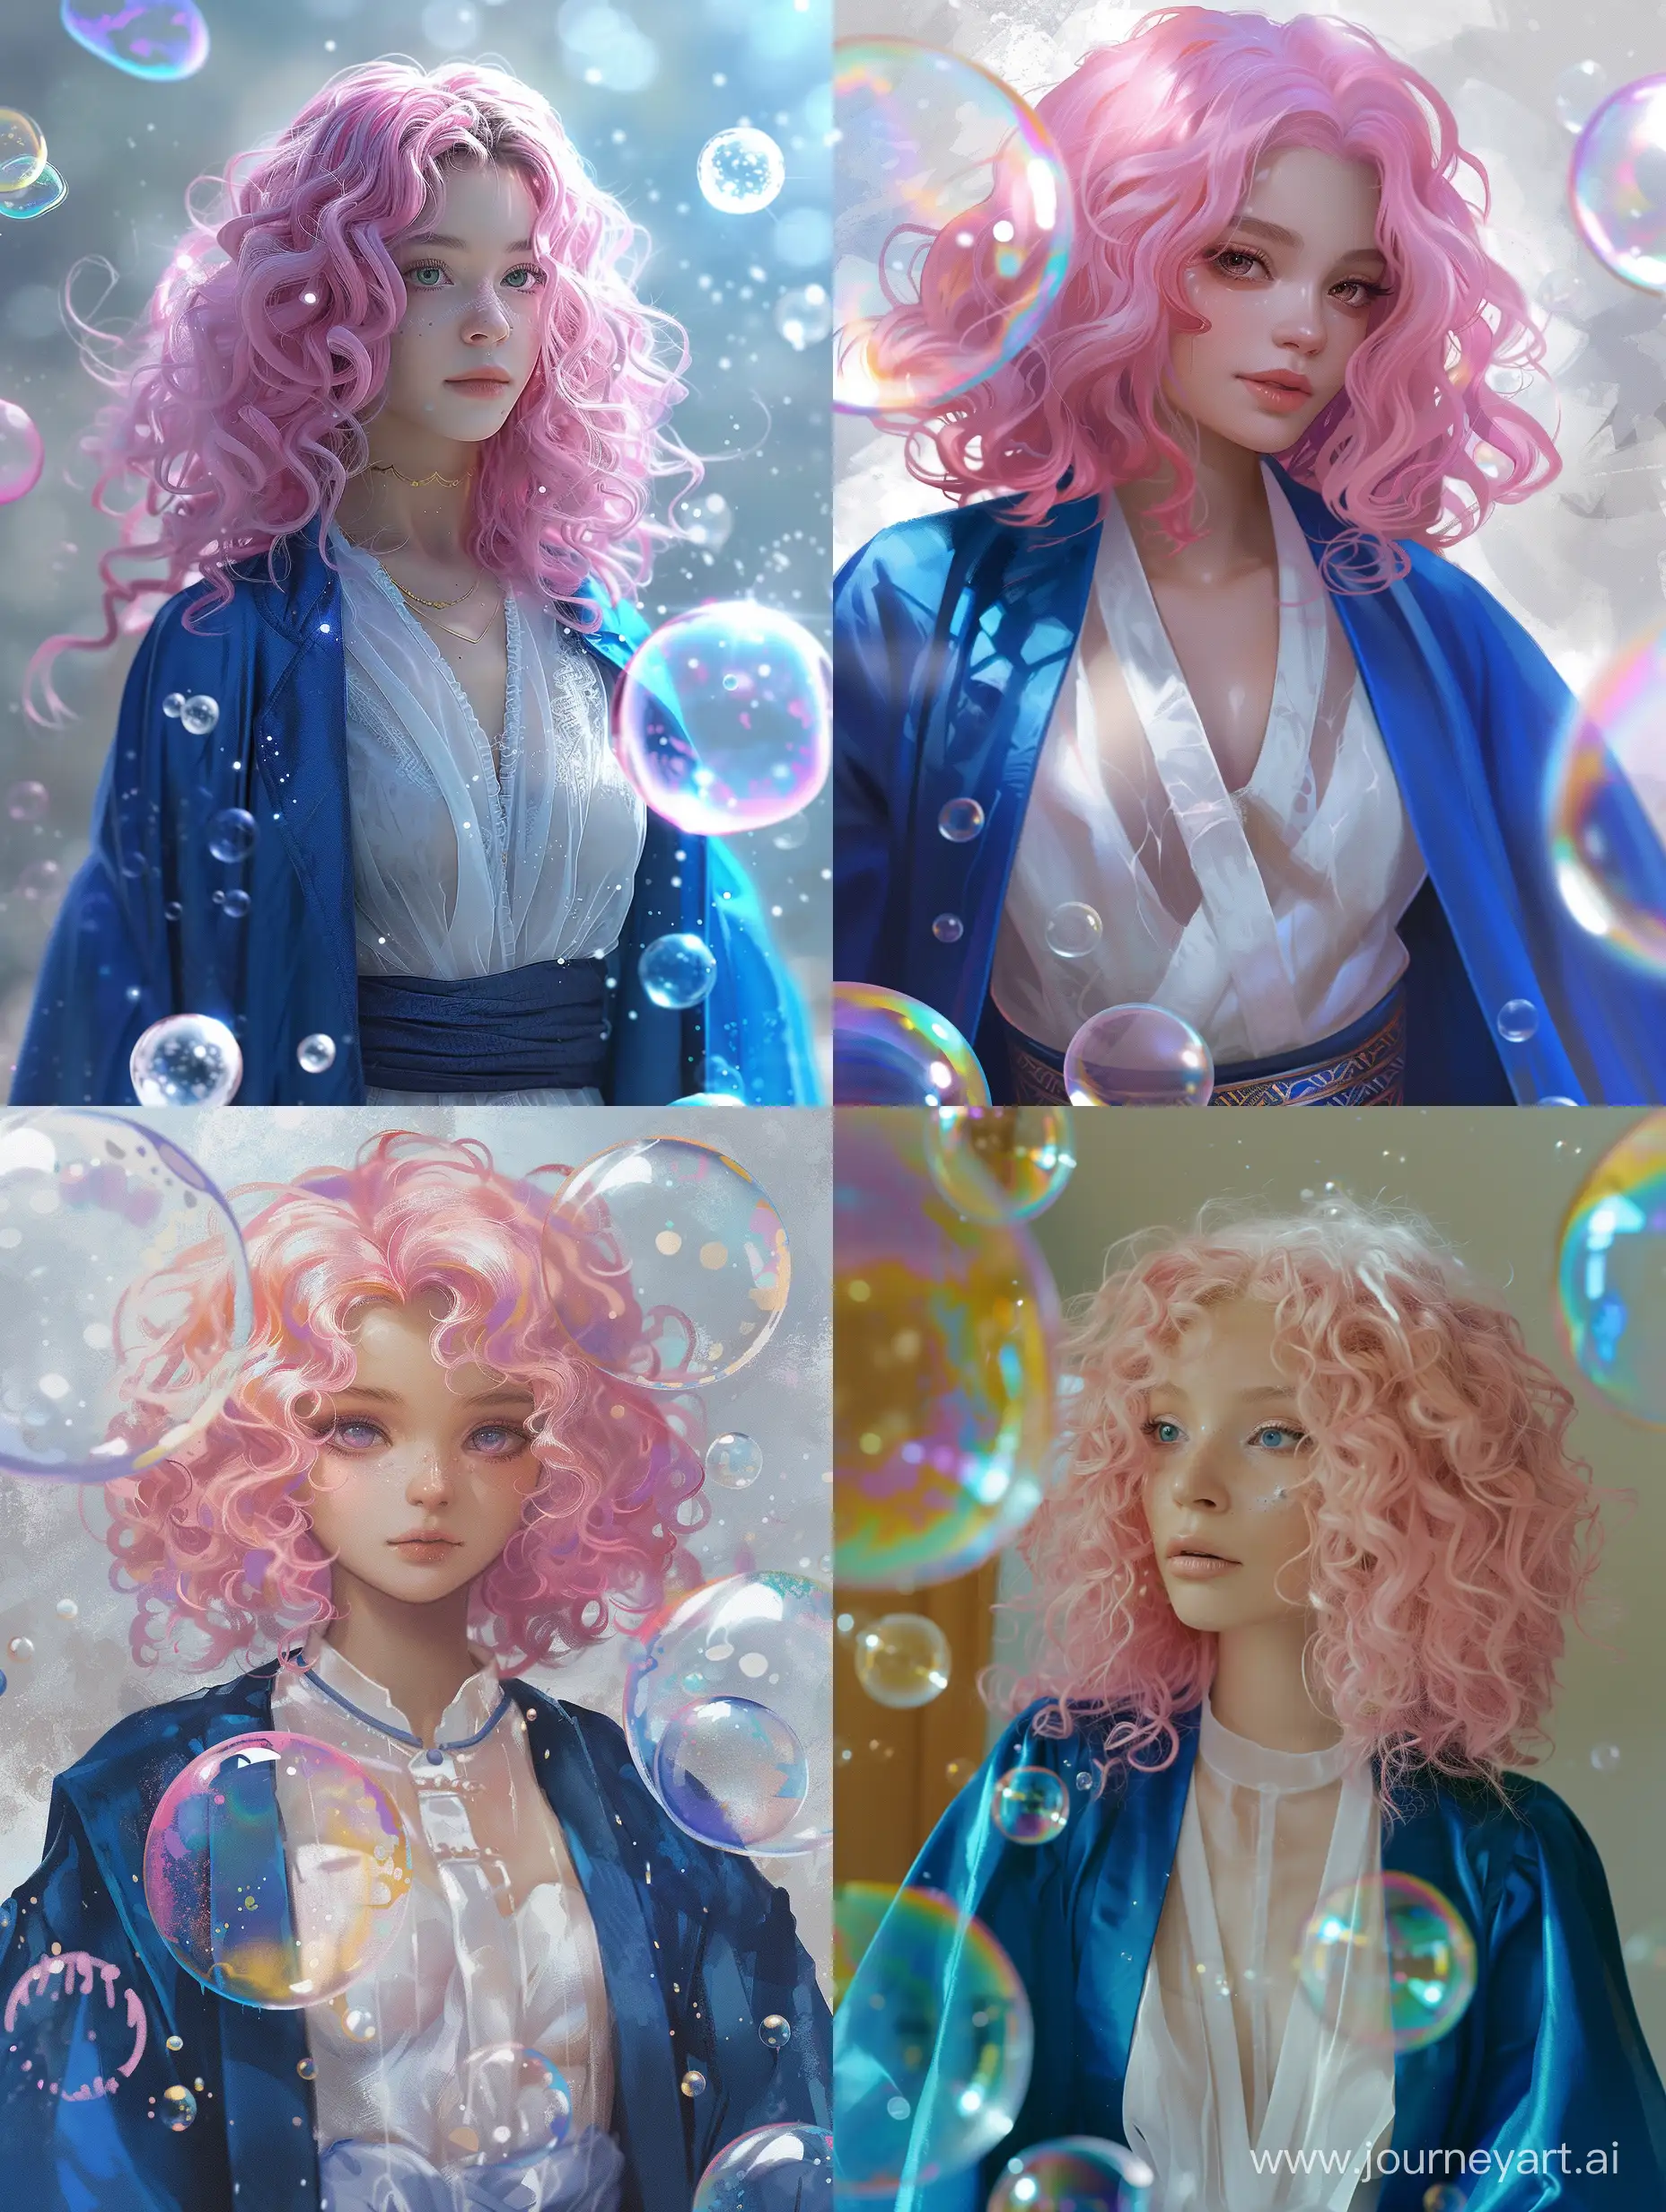 Enchanting-Sorcerer-Lady-in-Pink-Curly-Hair-and-Blue-Robe-Conjuring-Soap-Bubbles